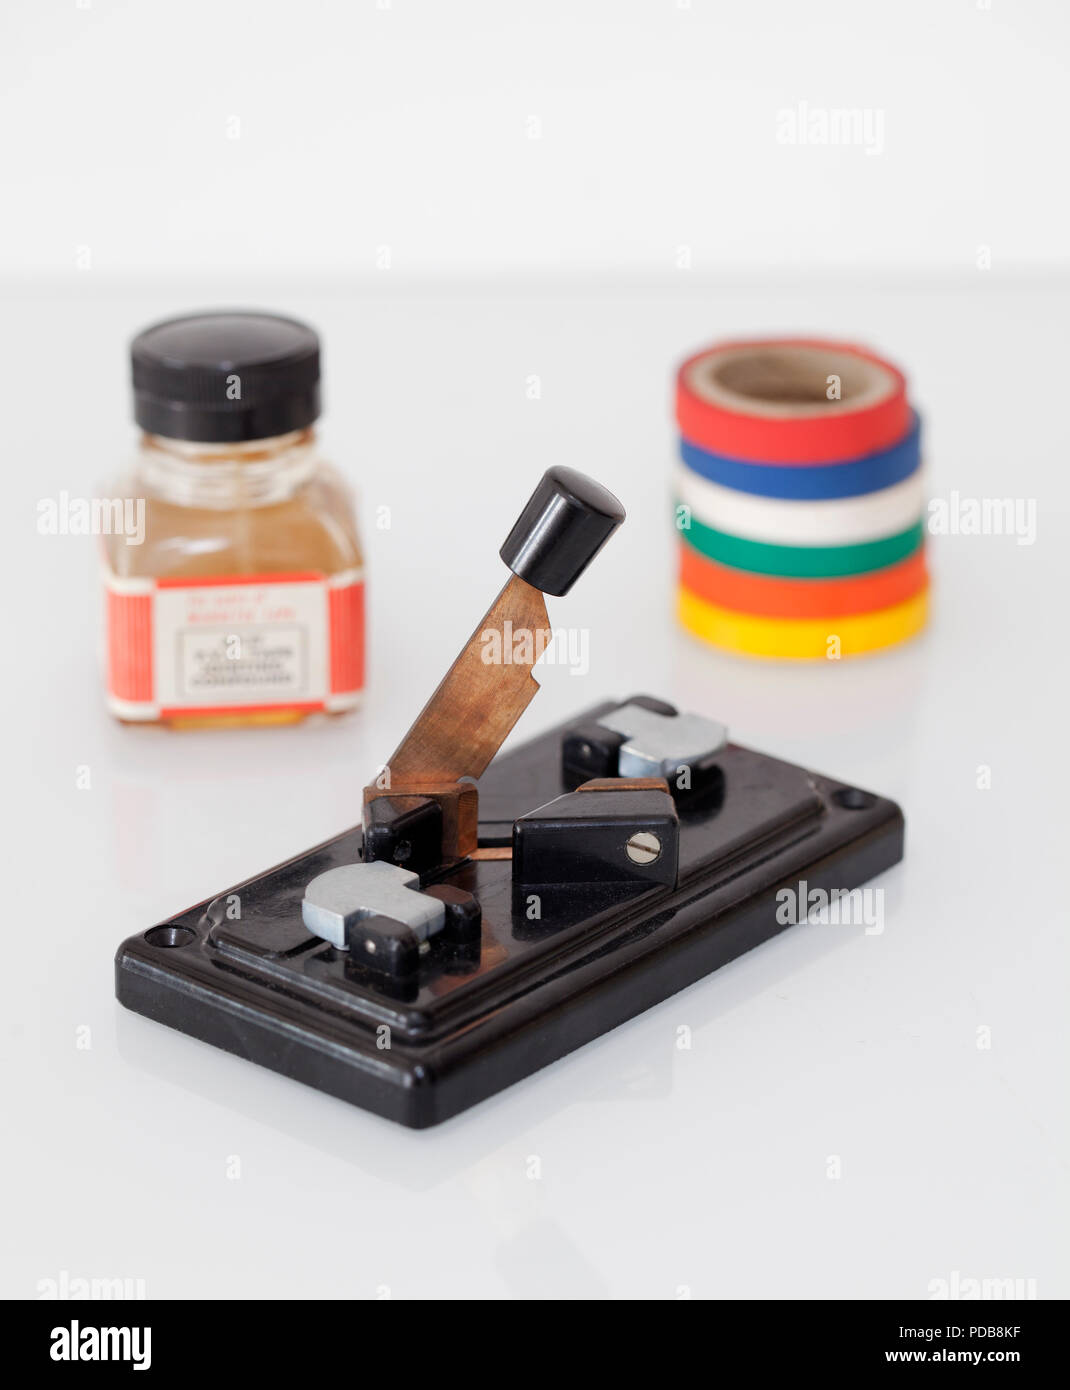 Old Vintage Bakelite Sound Editing Kit with Tape and Adhesive Stock Photo